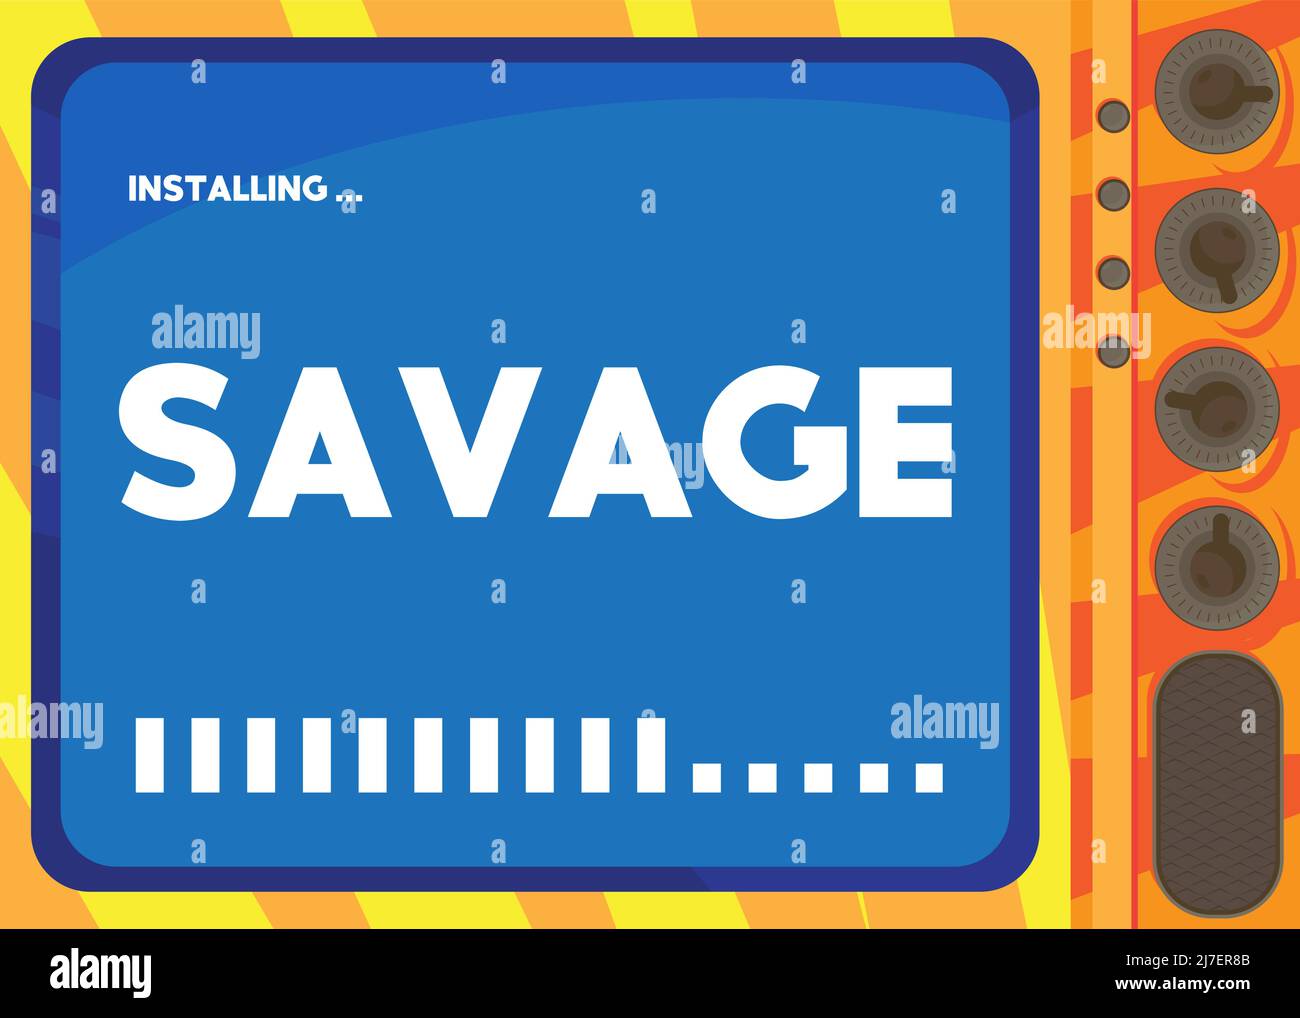 Cartoon Computer With the word Savage. Message of a screen displaying an installation window. Stock Vector